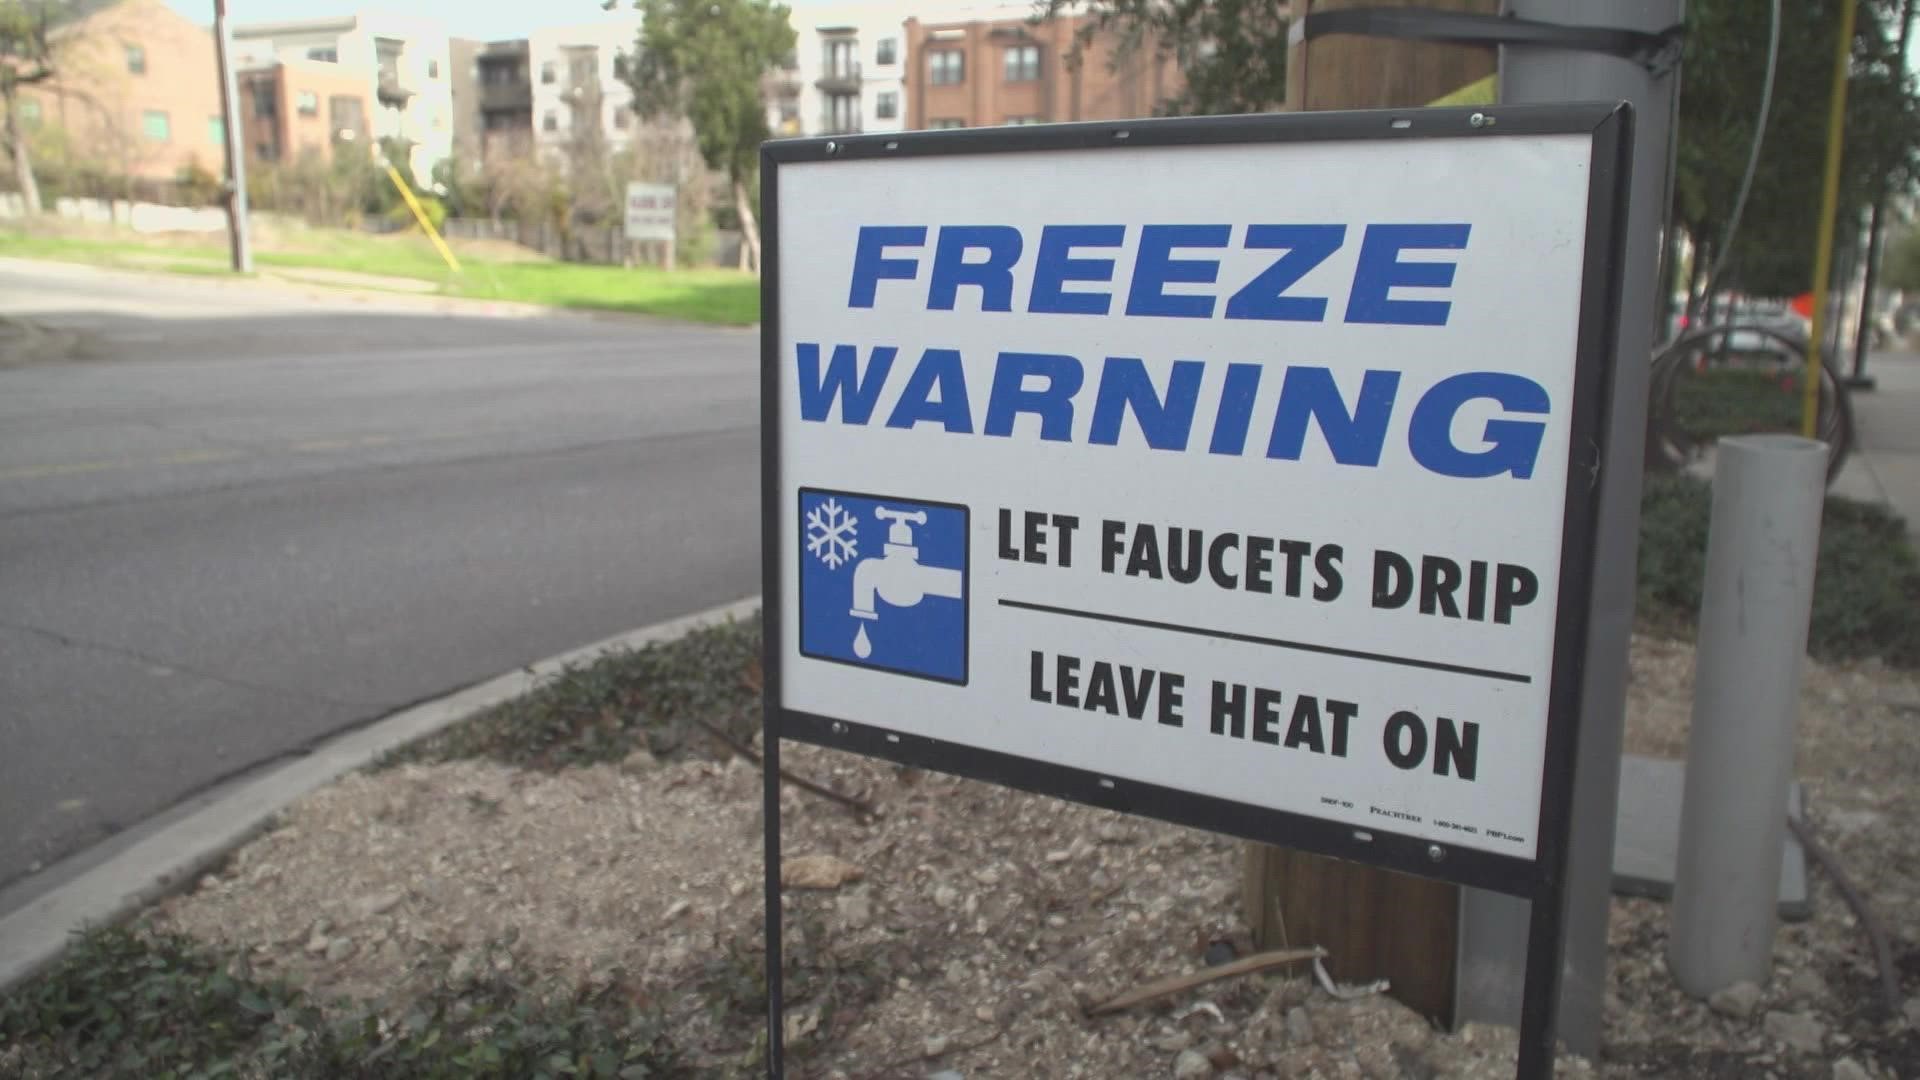 The Dallas Code Compliance Services team says renters and landlords should take steps to be prepared for winter weather.